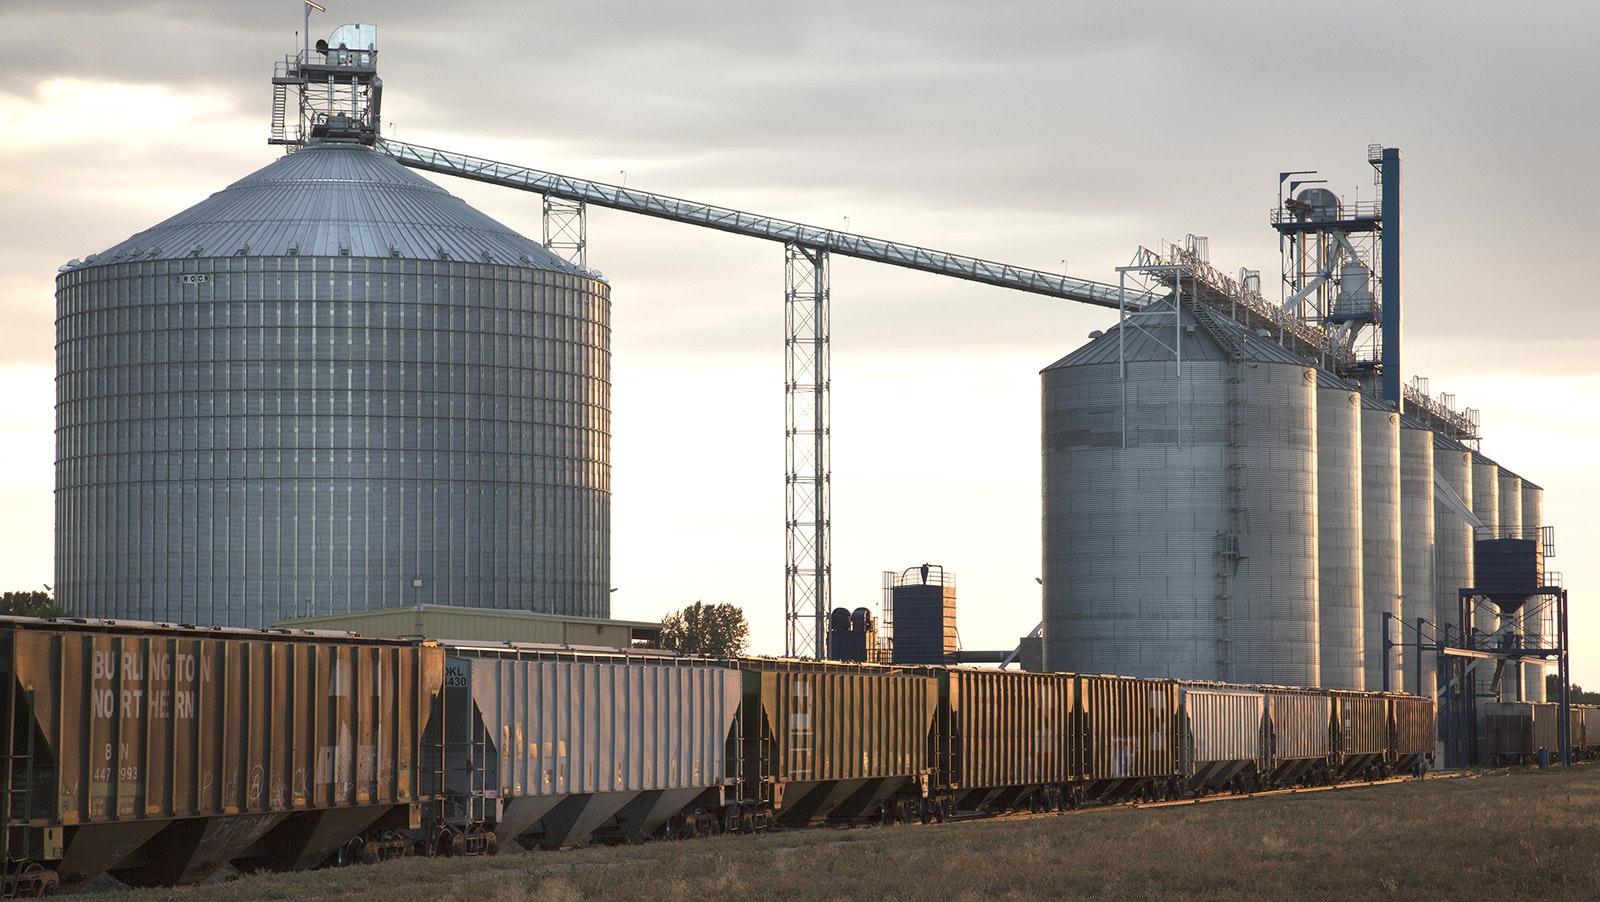 Large silos collect barley for Briess Malt and Ingredient Co. in Wyoming, ready to ship to brewery customers.